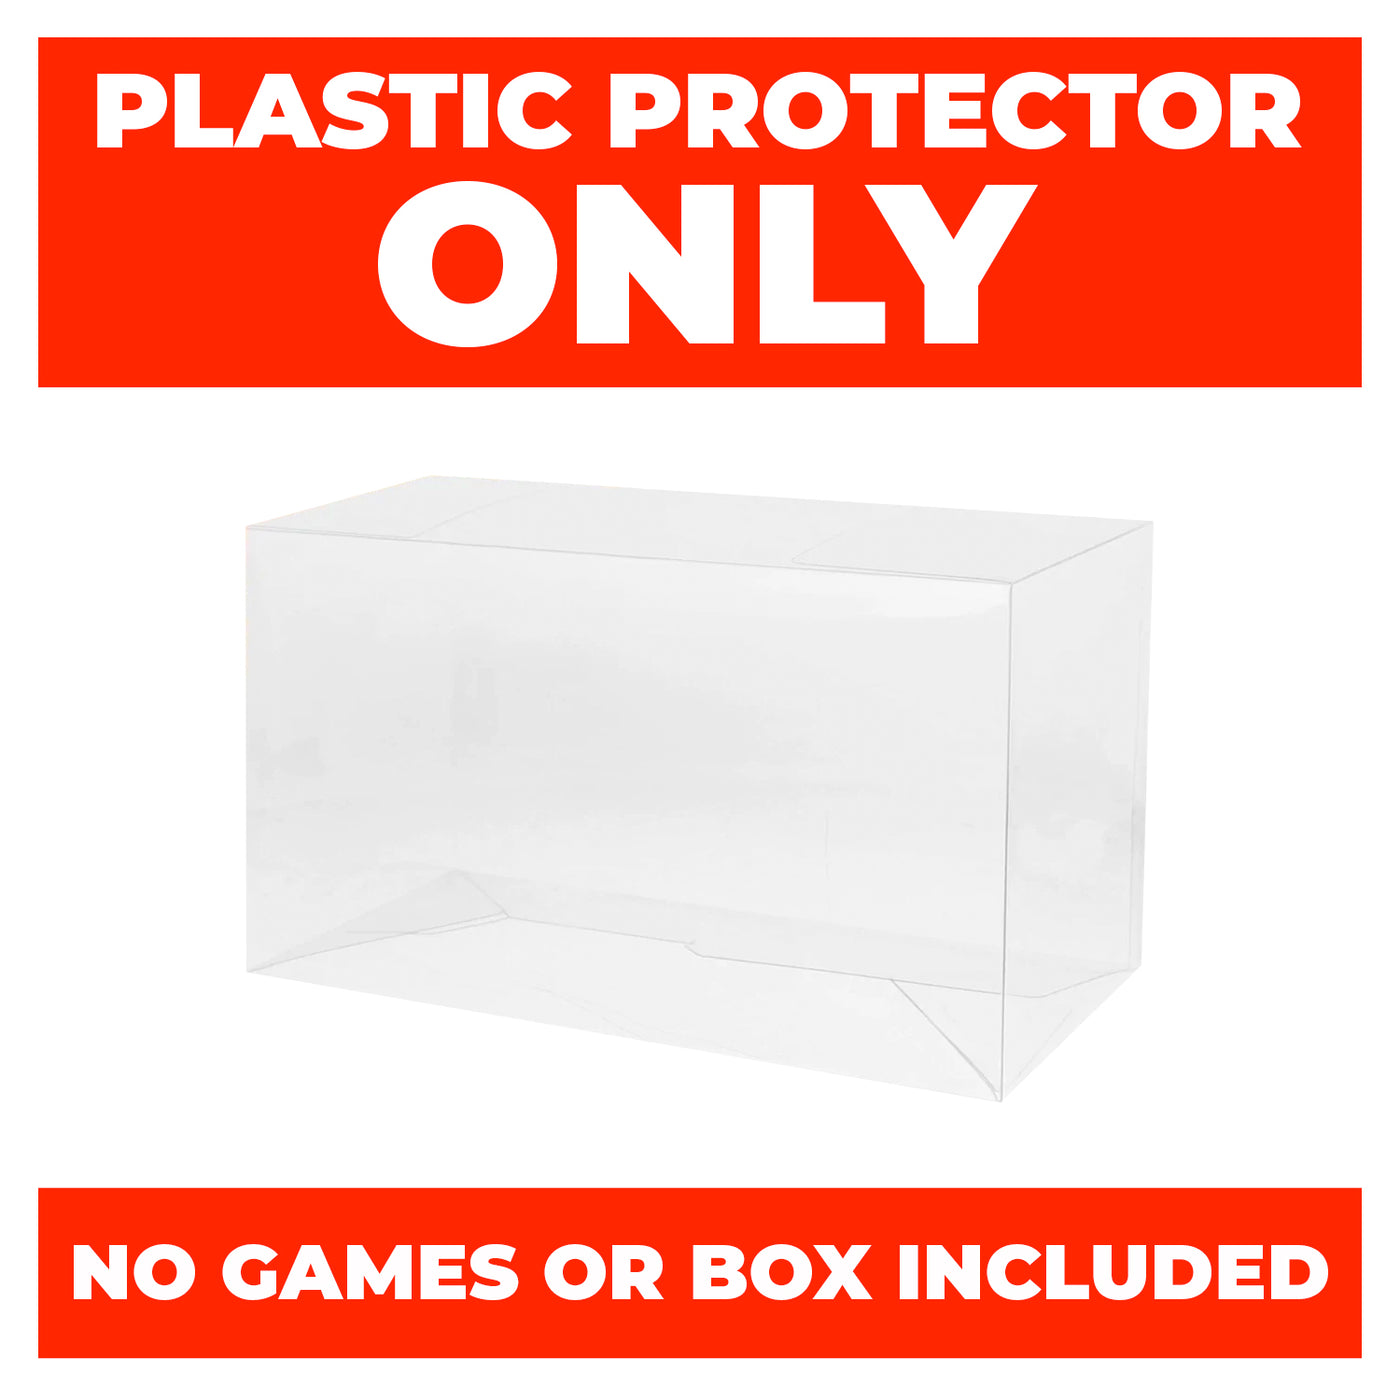 Plastic Protector for NINTENDO Wii Video Game Console Box 0.50mm thick, UV & Scratch Resistant on The Pop Protector Guide by Display Geek